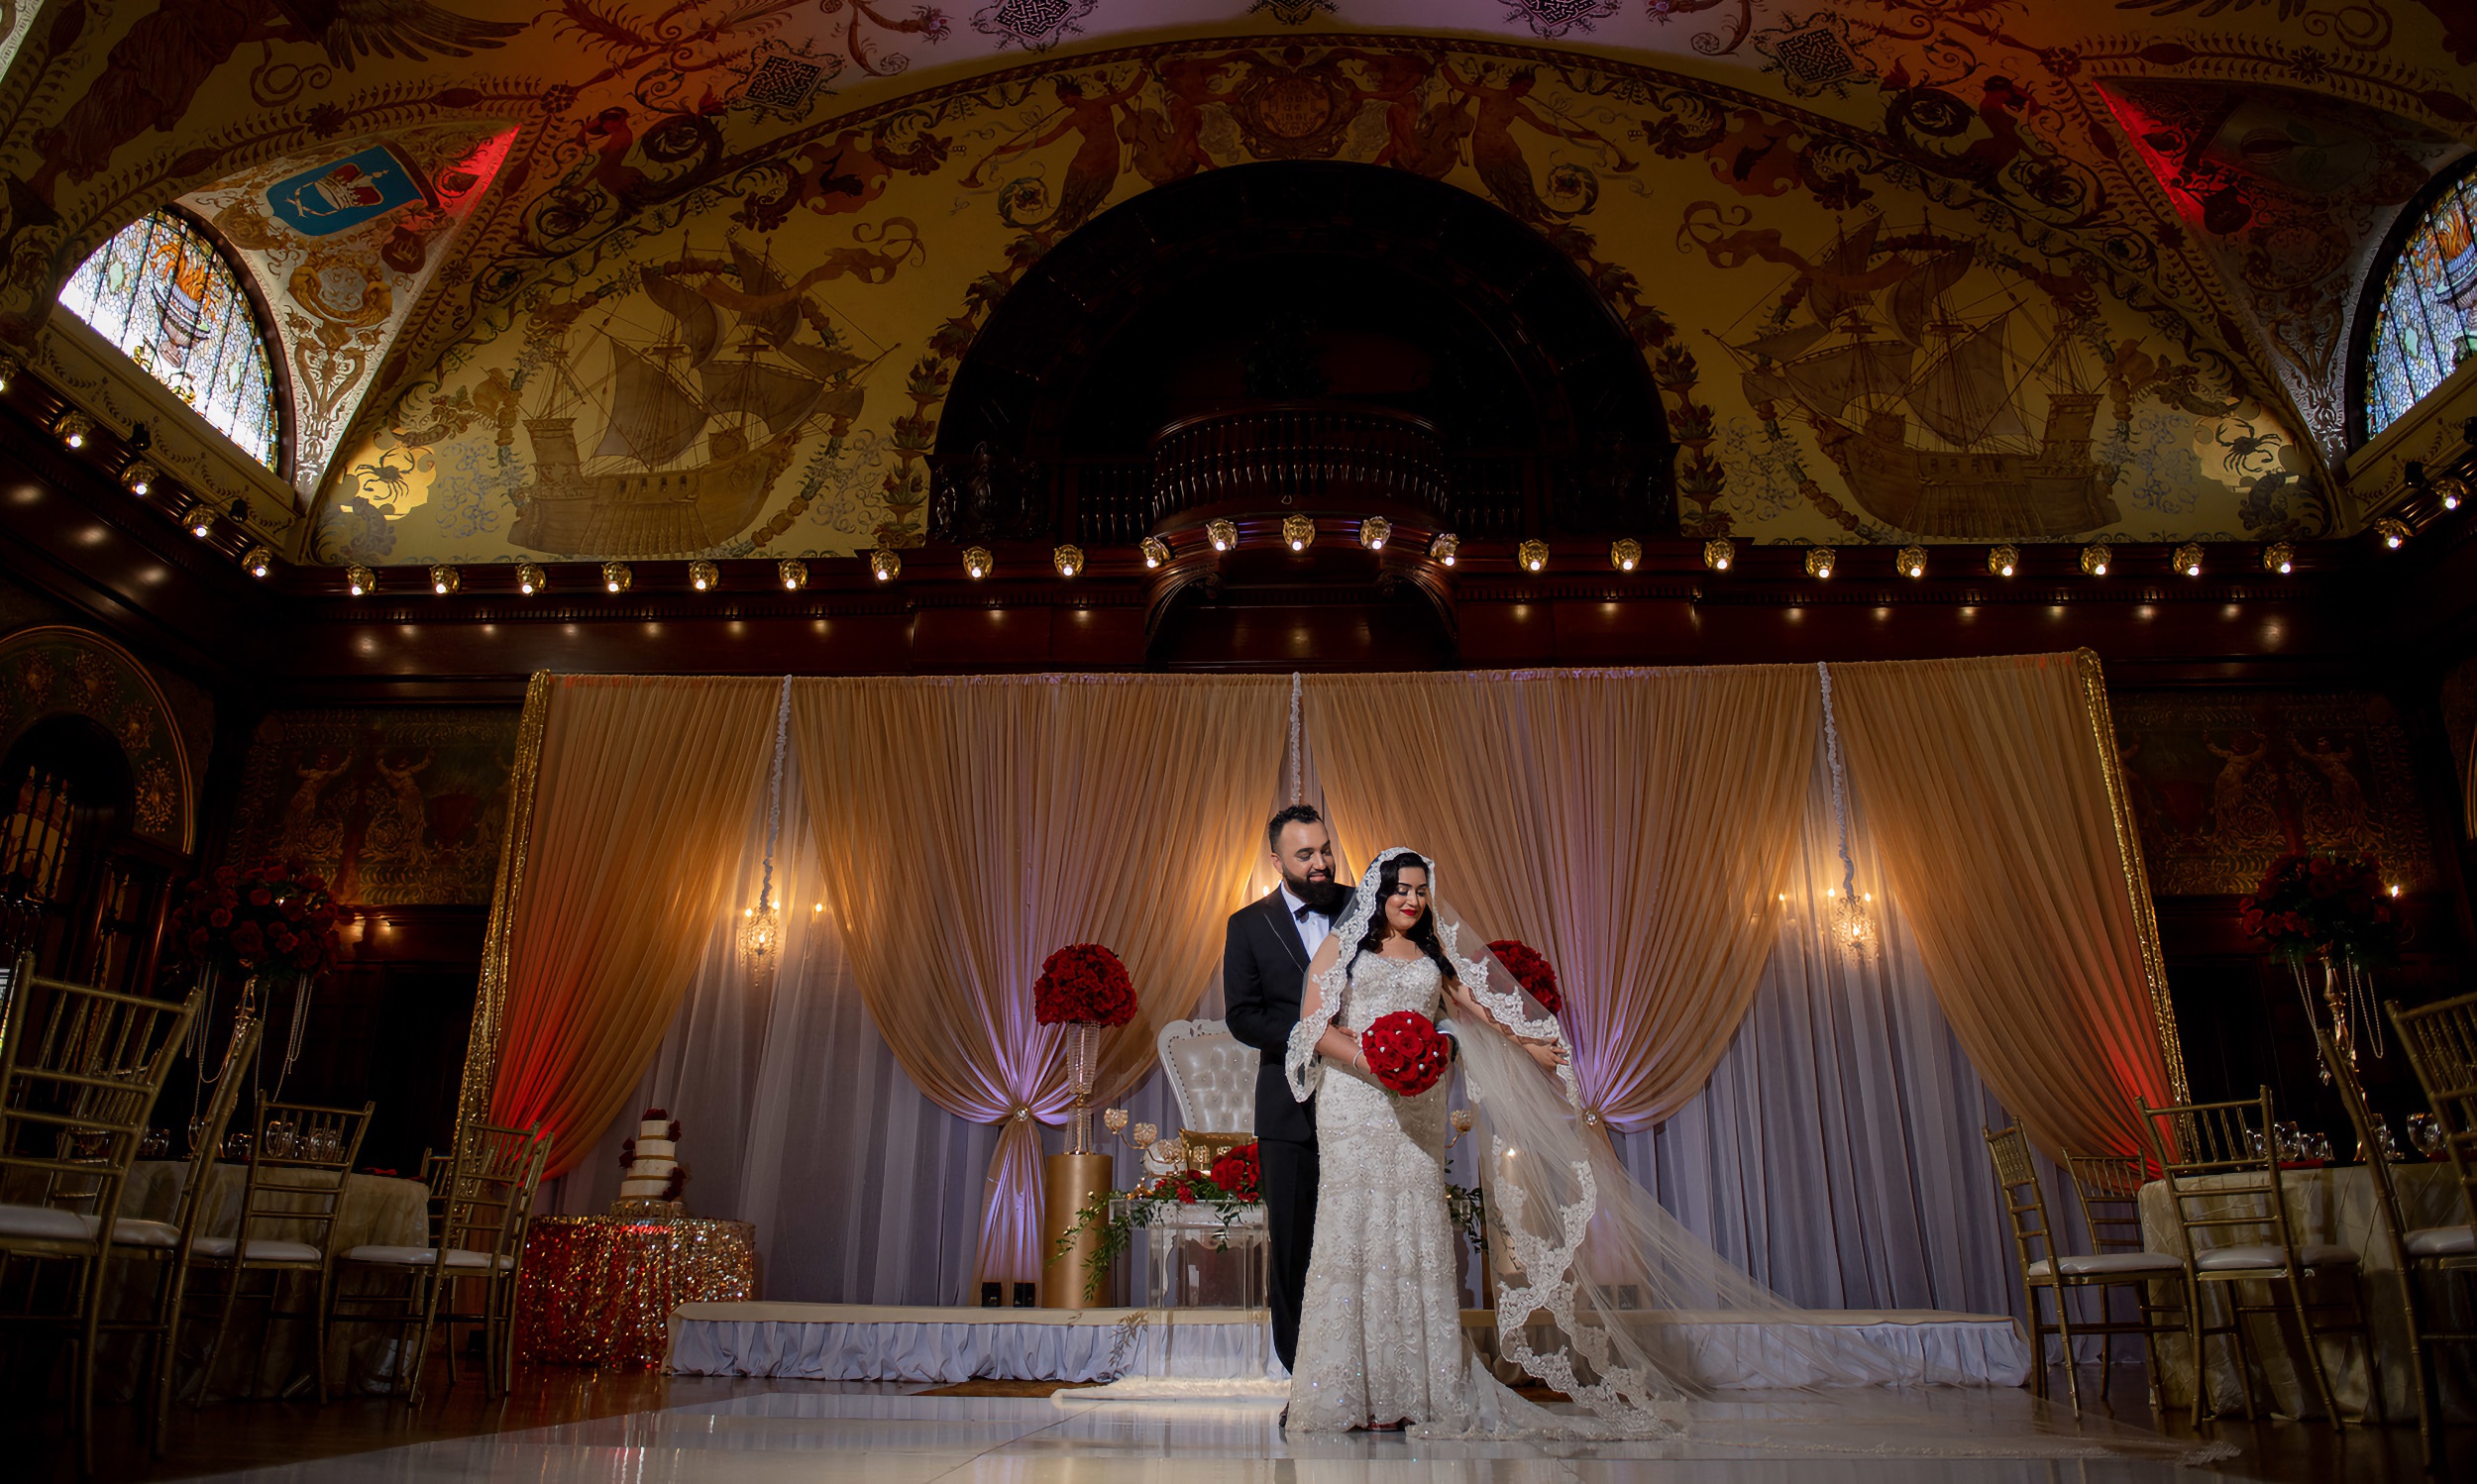 A wedding set in the Grand Ballroom of Ponce